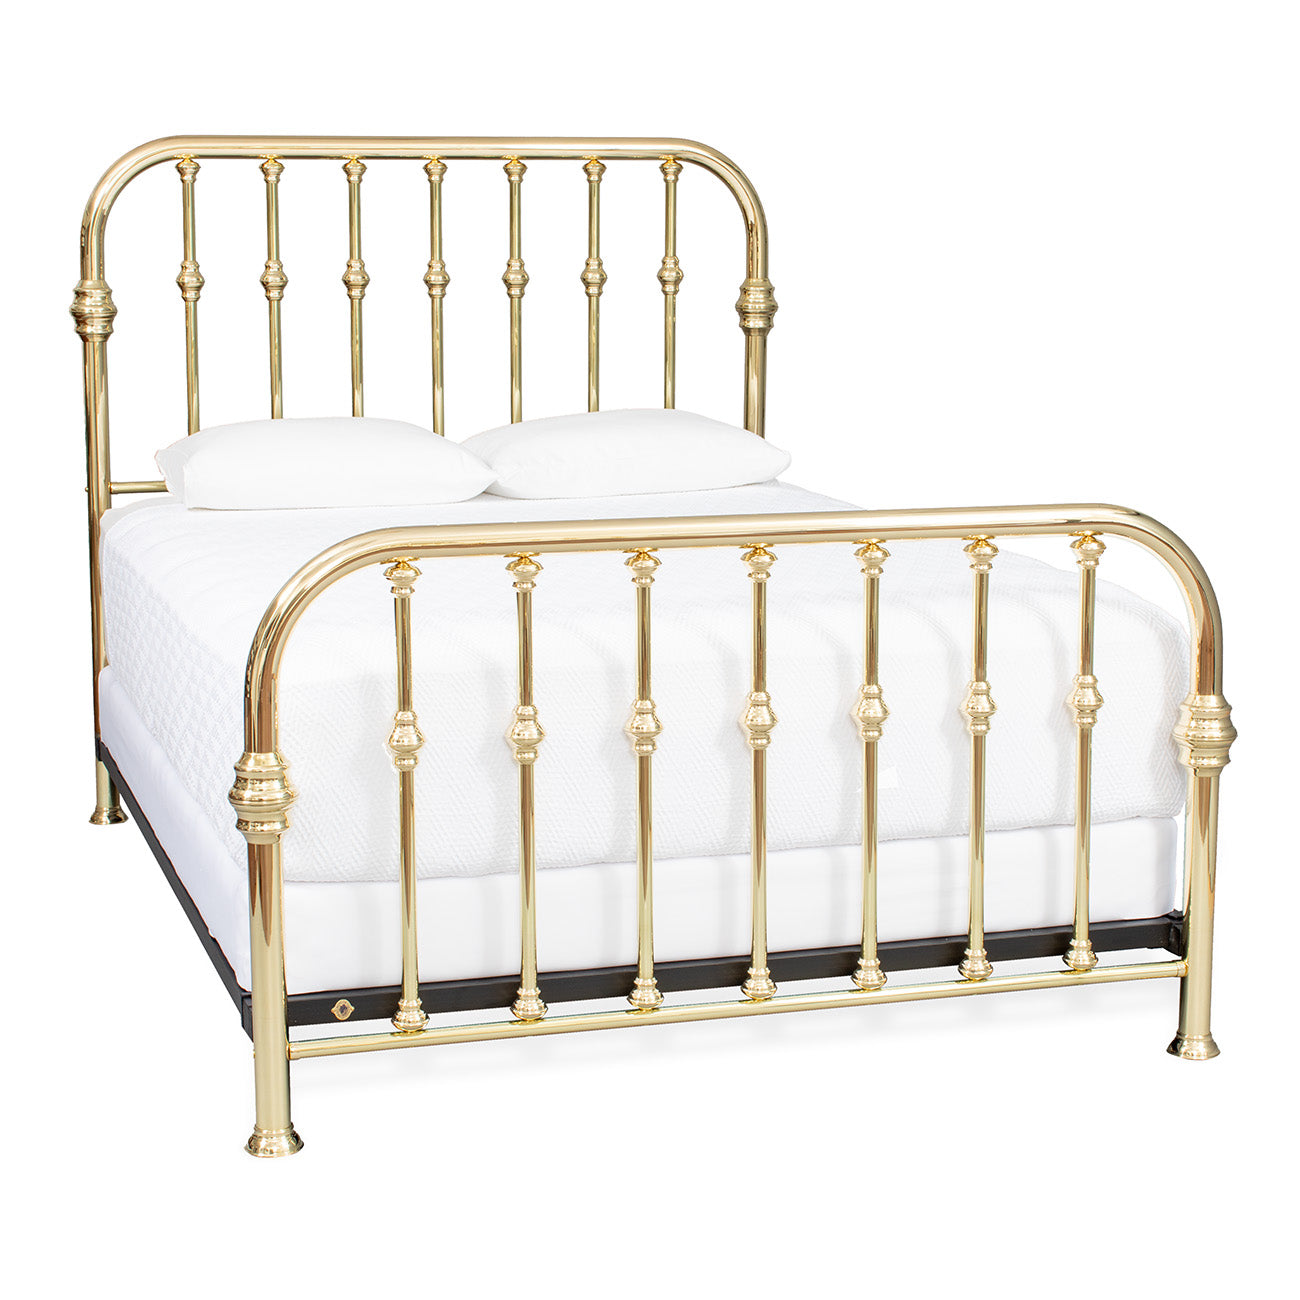 Turn of the Century Bed, Brass Beds of Virginia